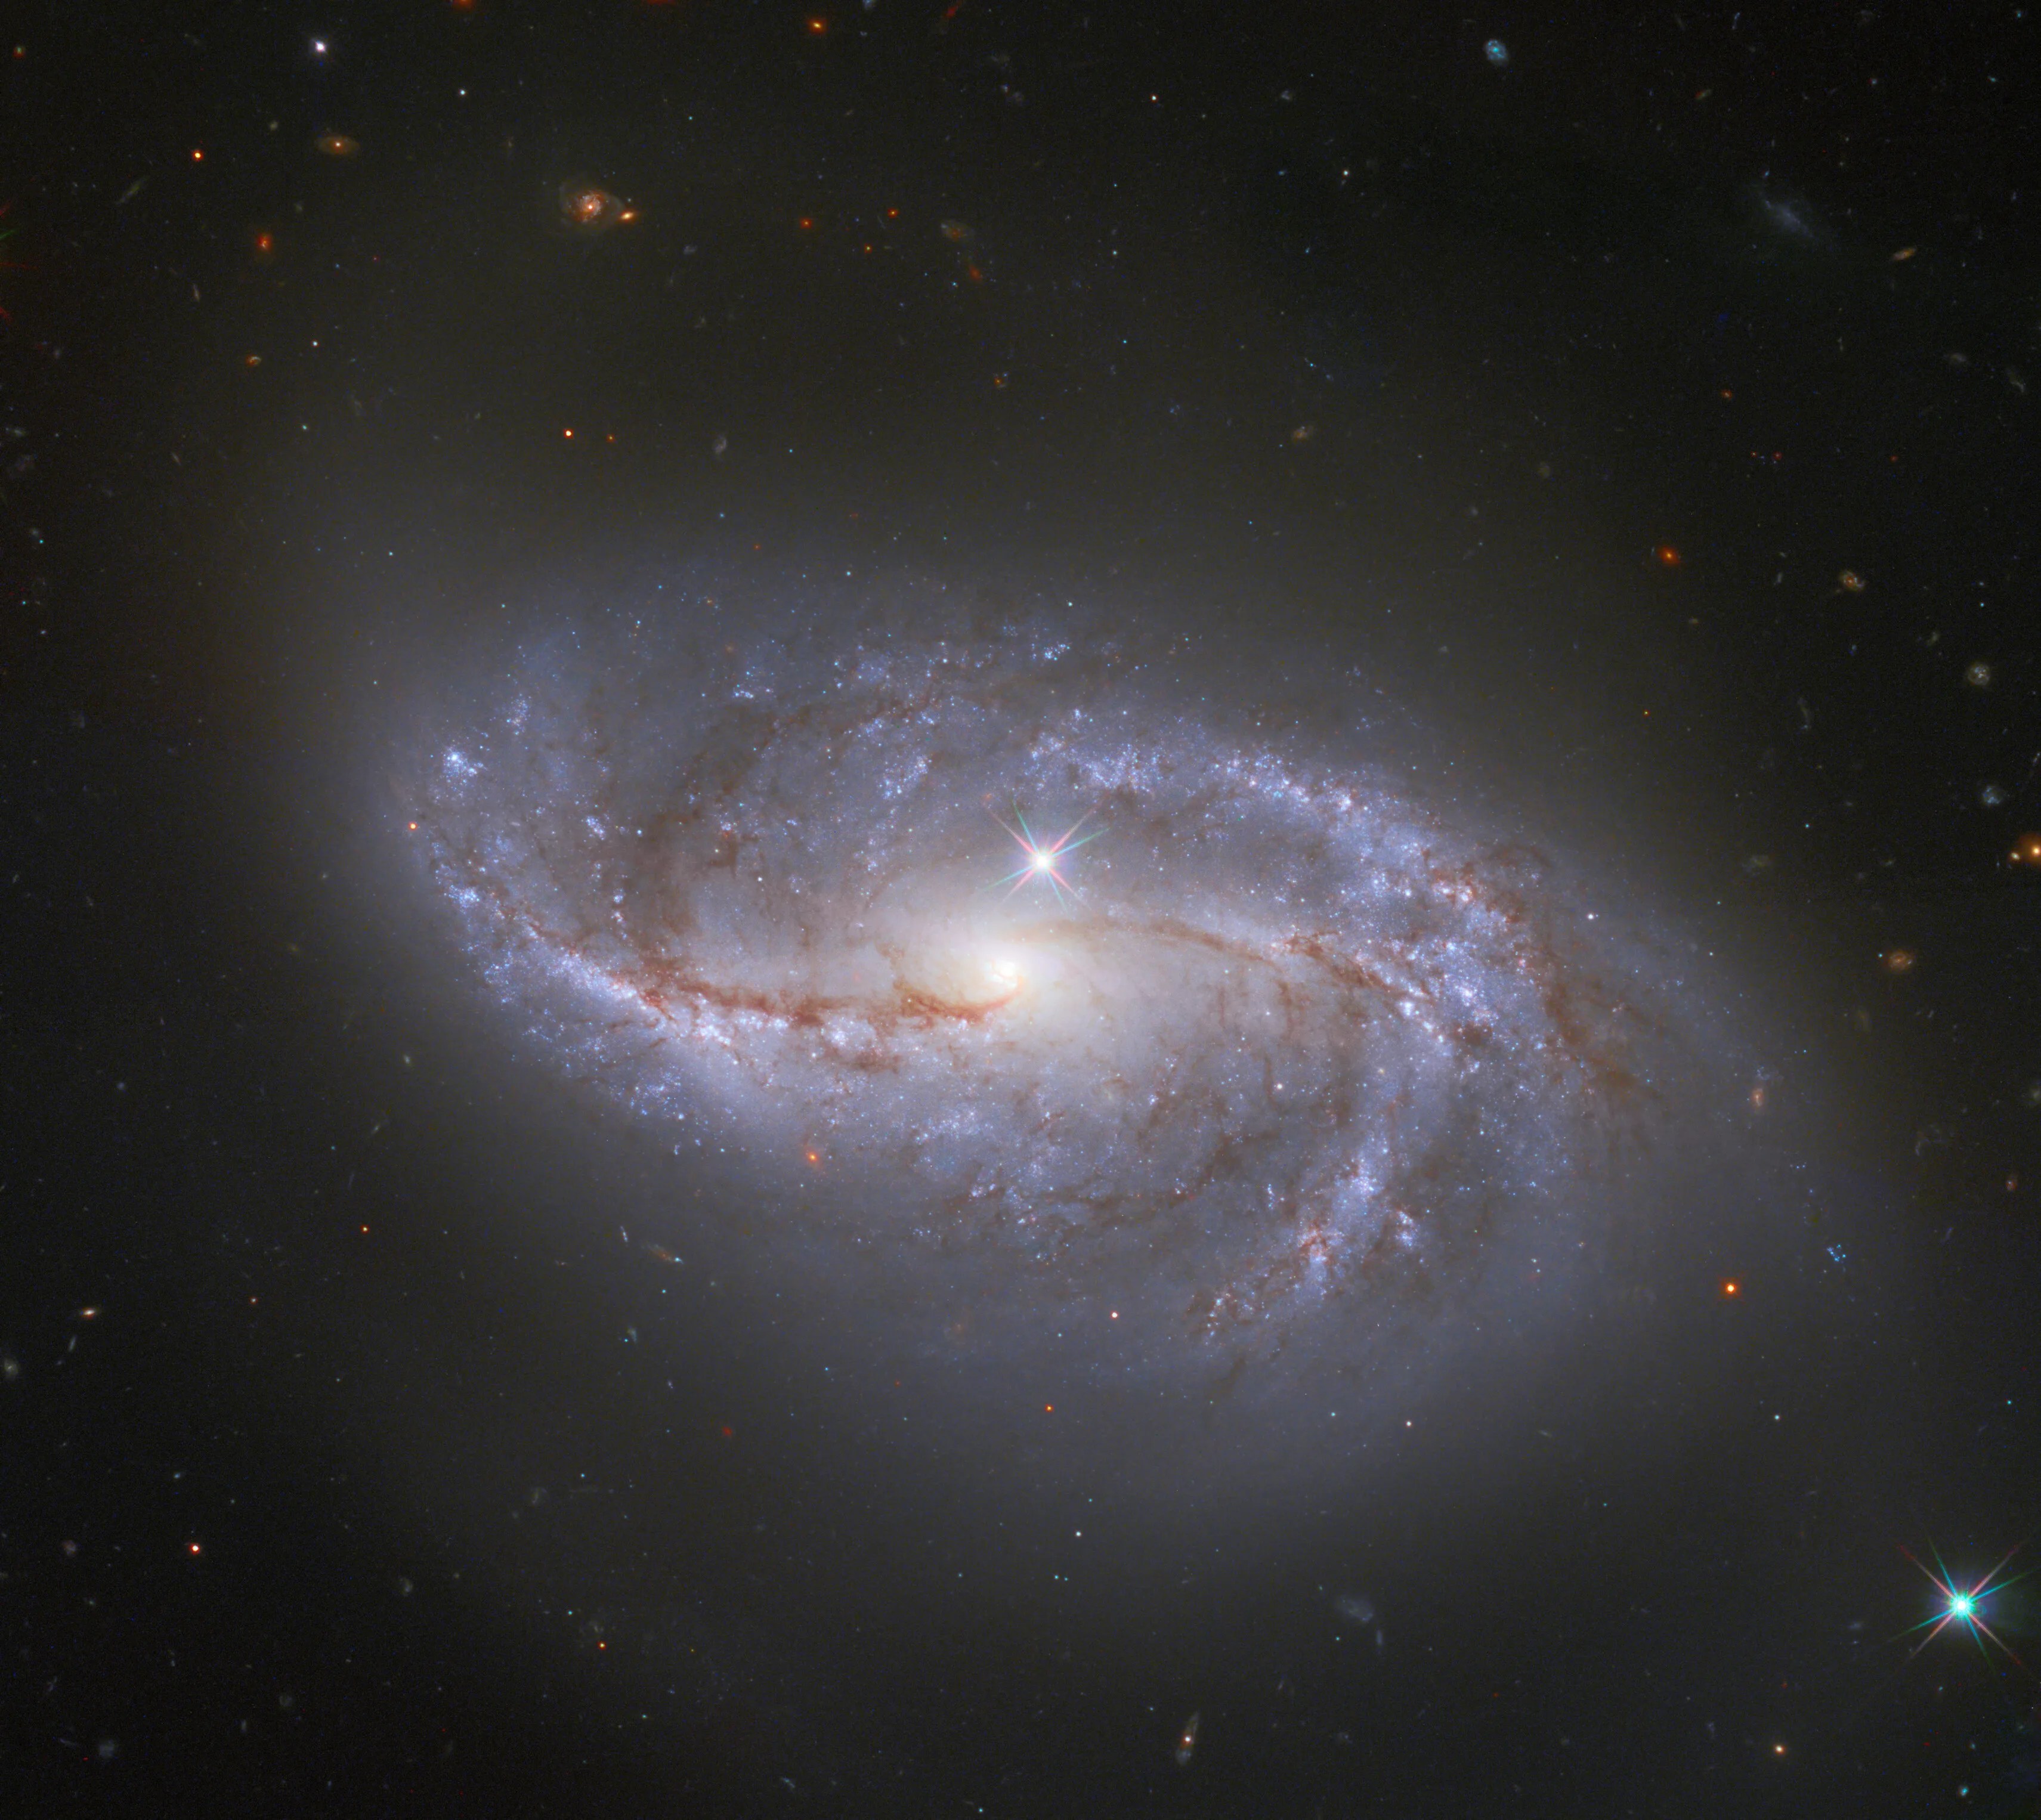 Bright spiral galaxy ngc 2608 against the black backdrop of space